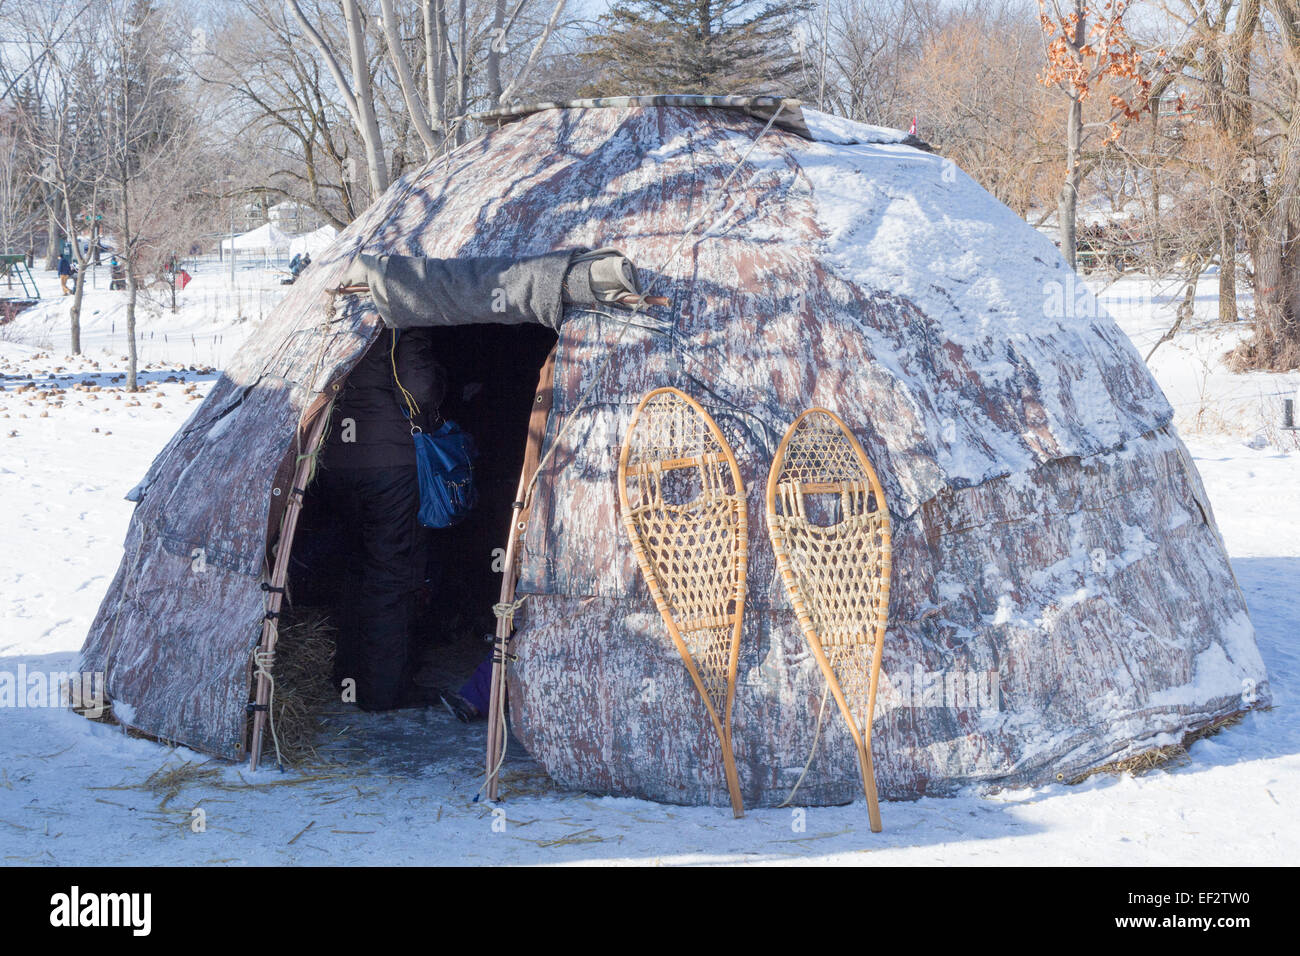 wigwam-at-the-winter-festival-in-canning